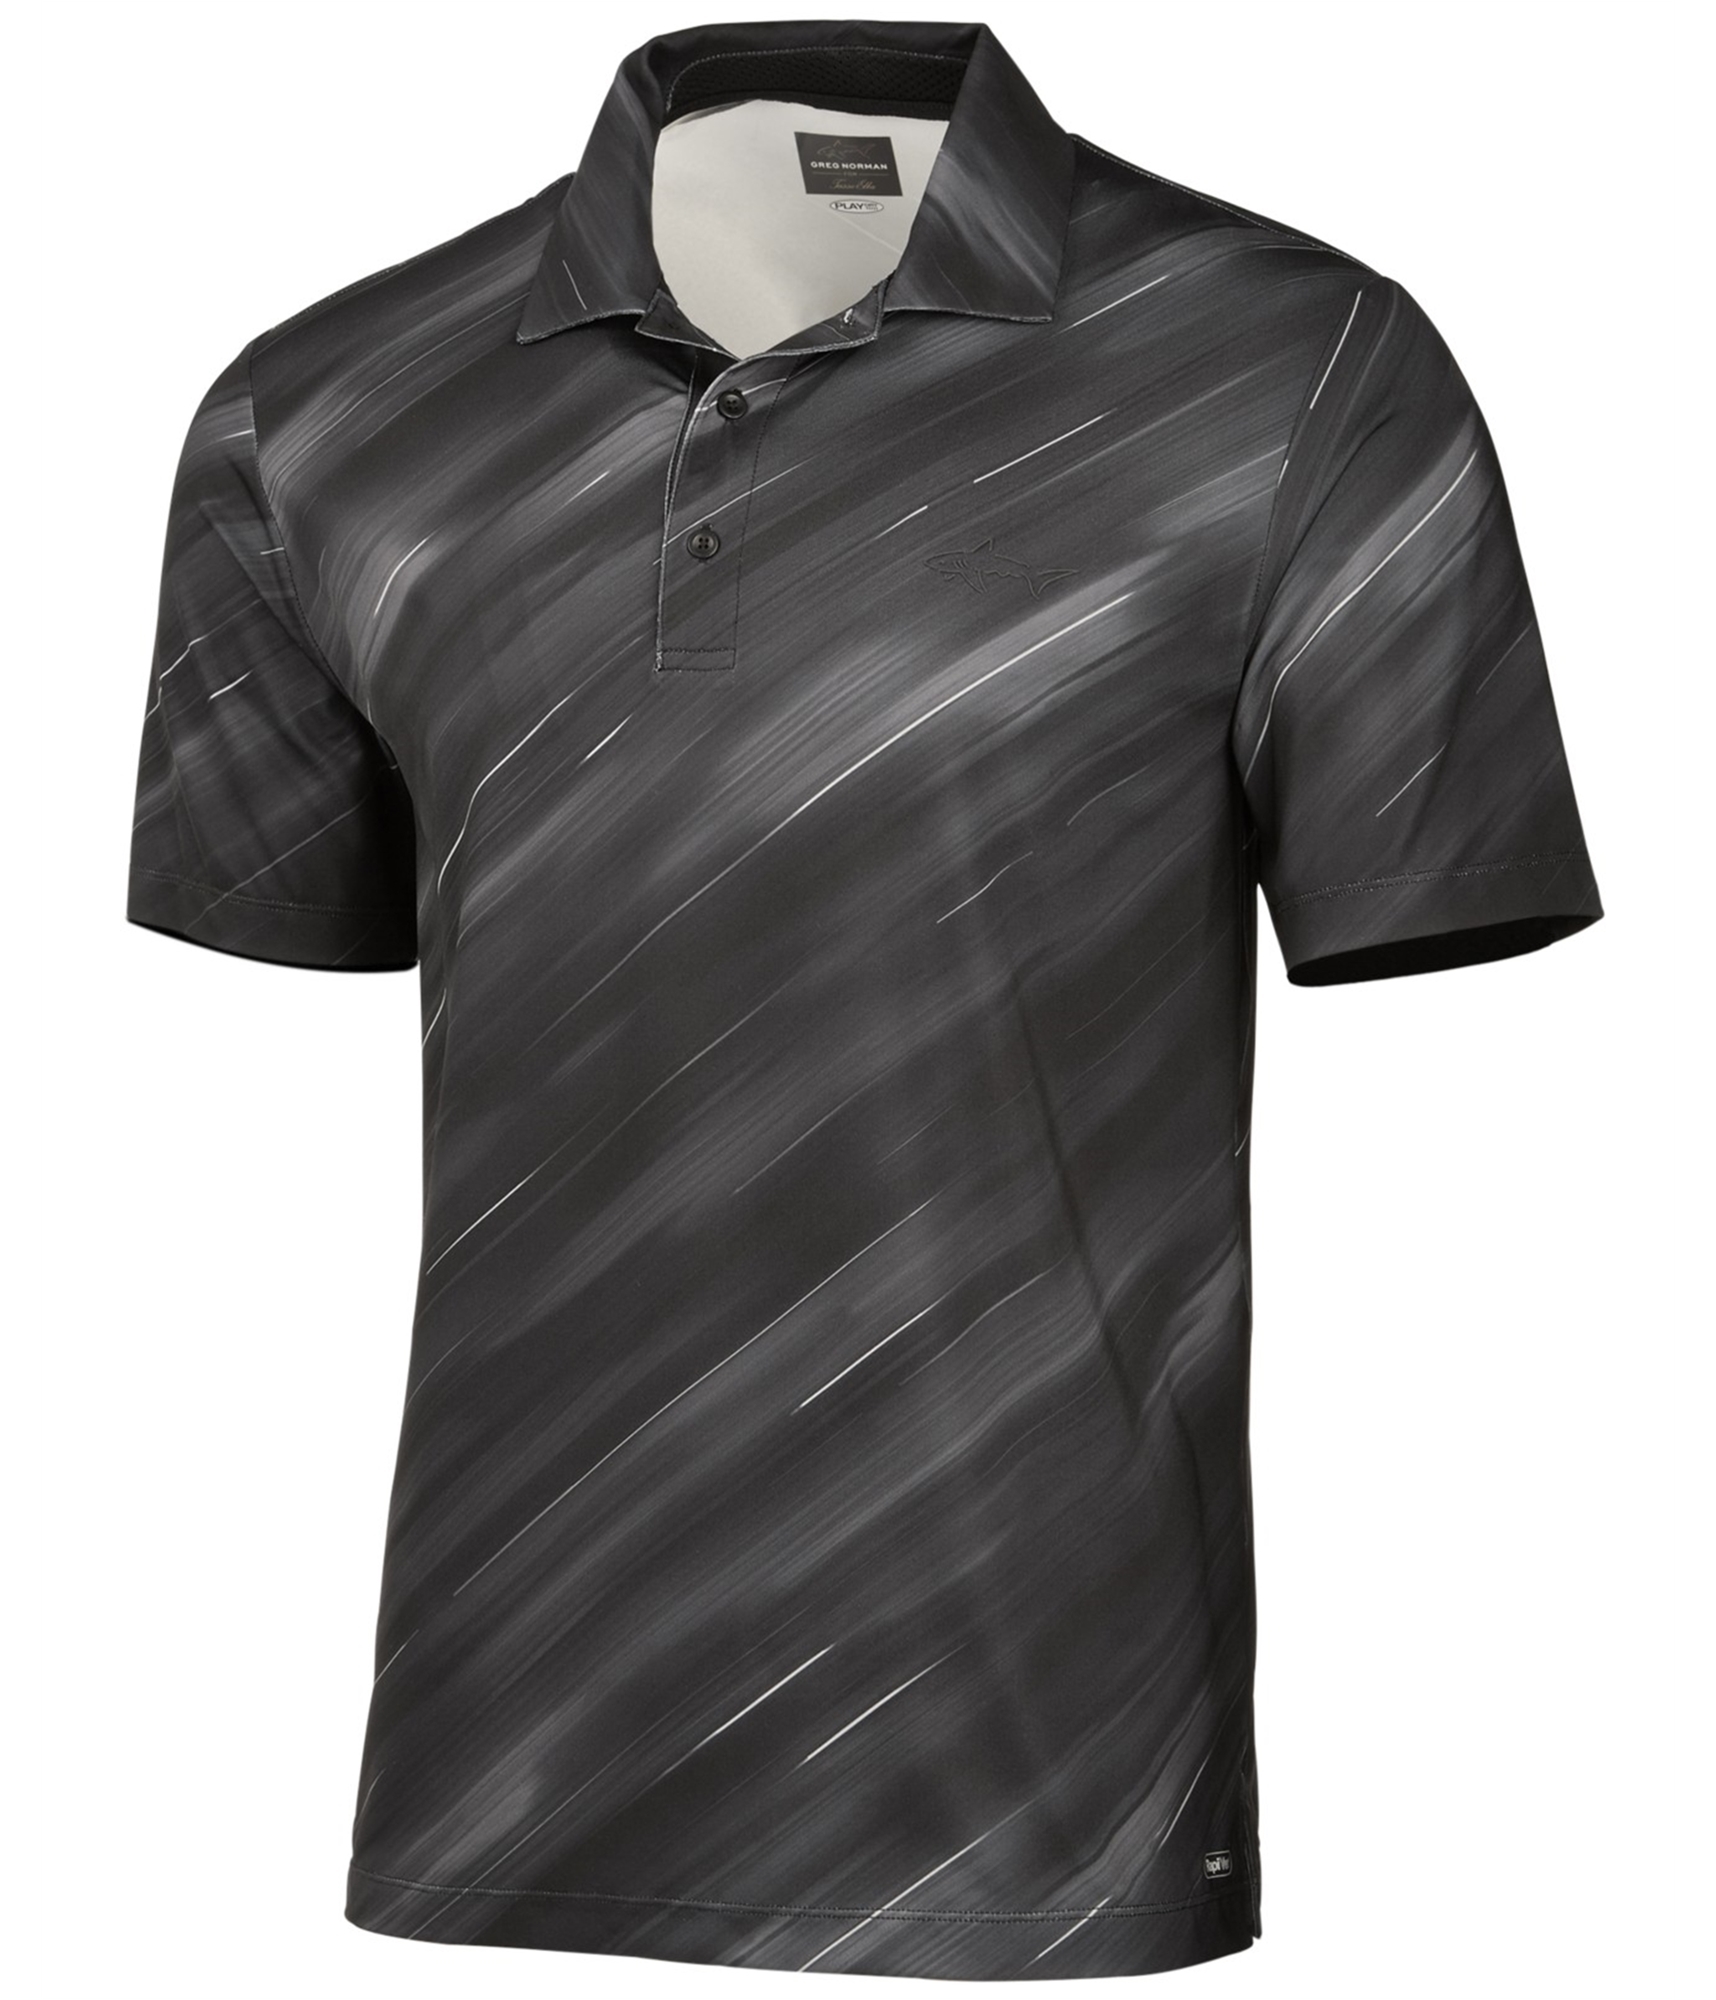 Buy a Mens Greg Norman Streak Perforated Rugby Polo Shirt Online ...